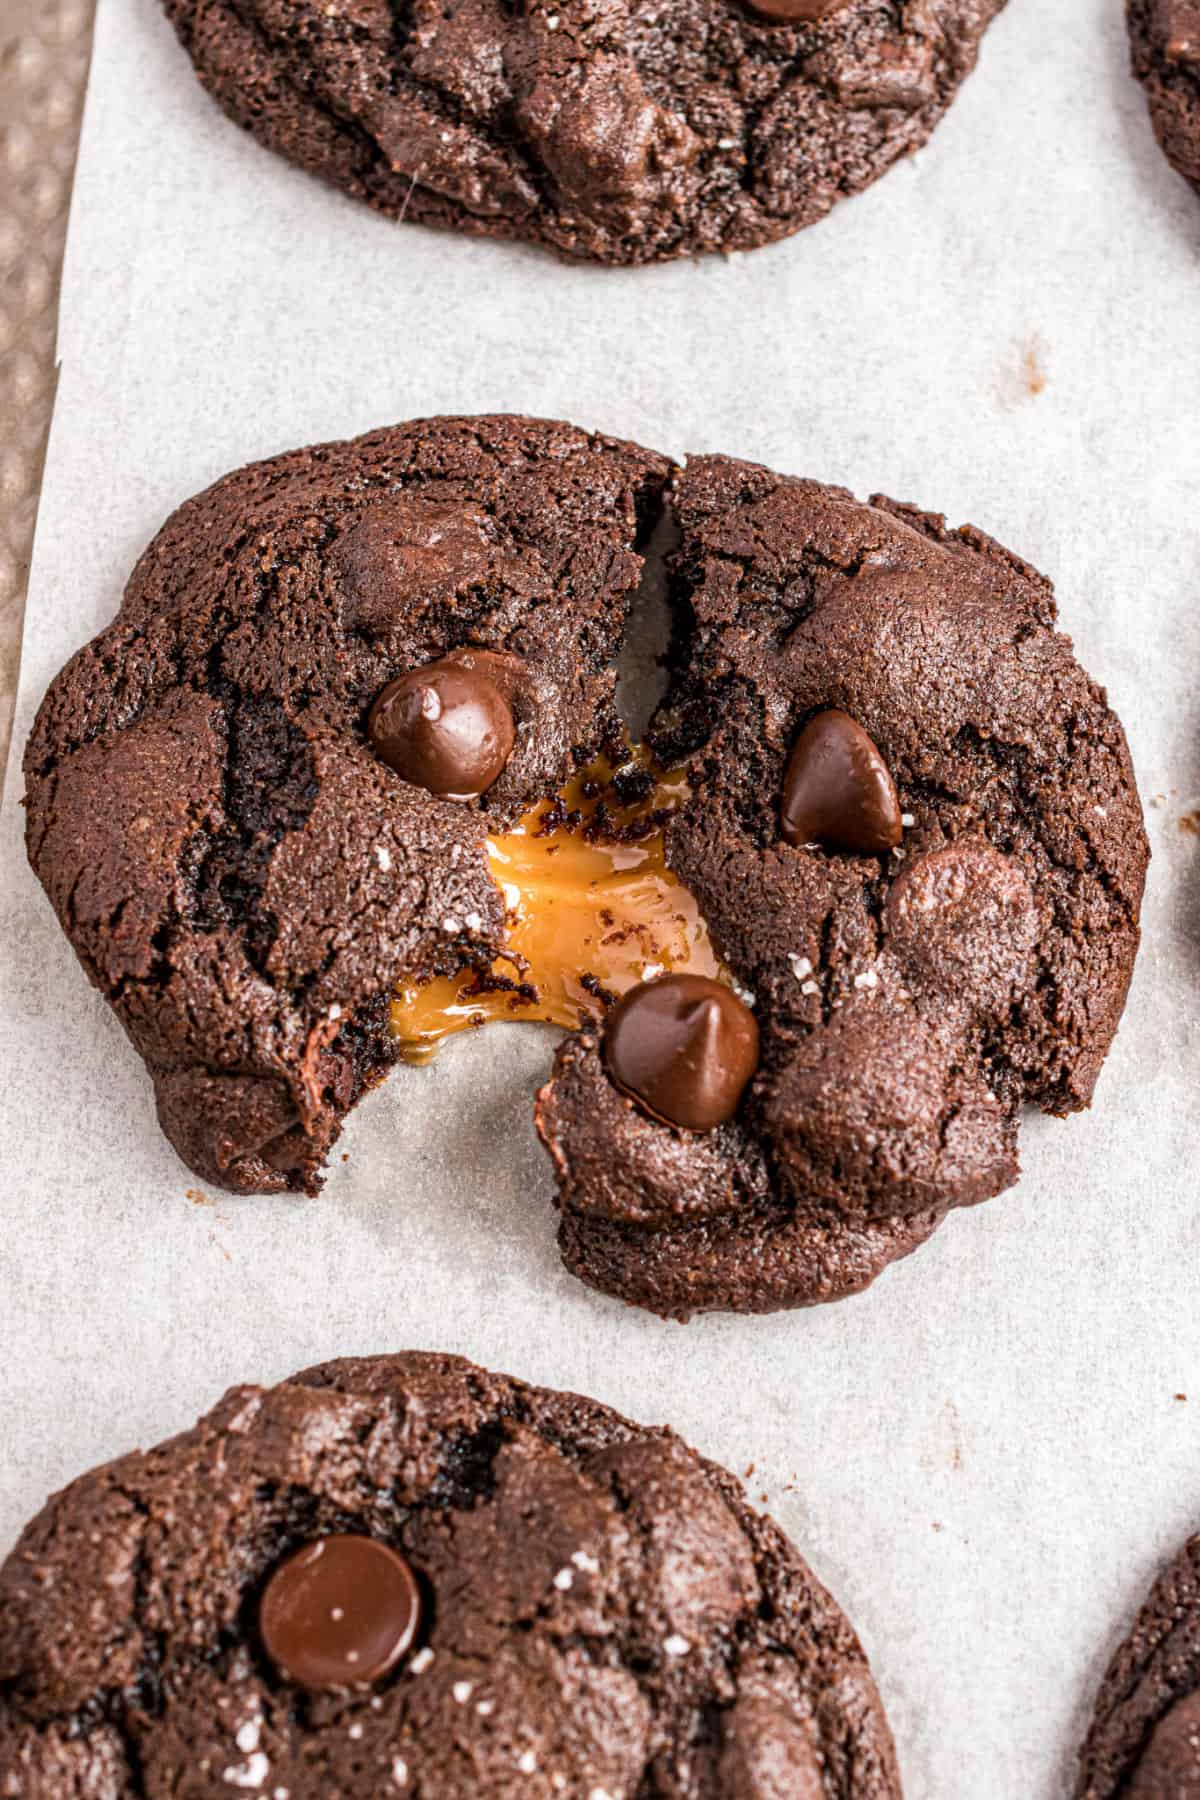 Chocolate cookies with a caramel center, oozing out of middle.